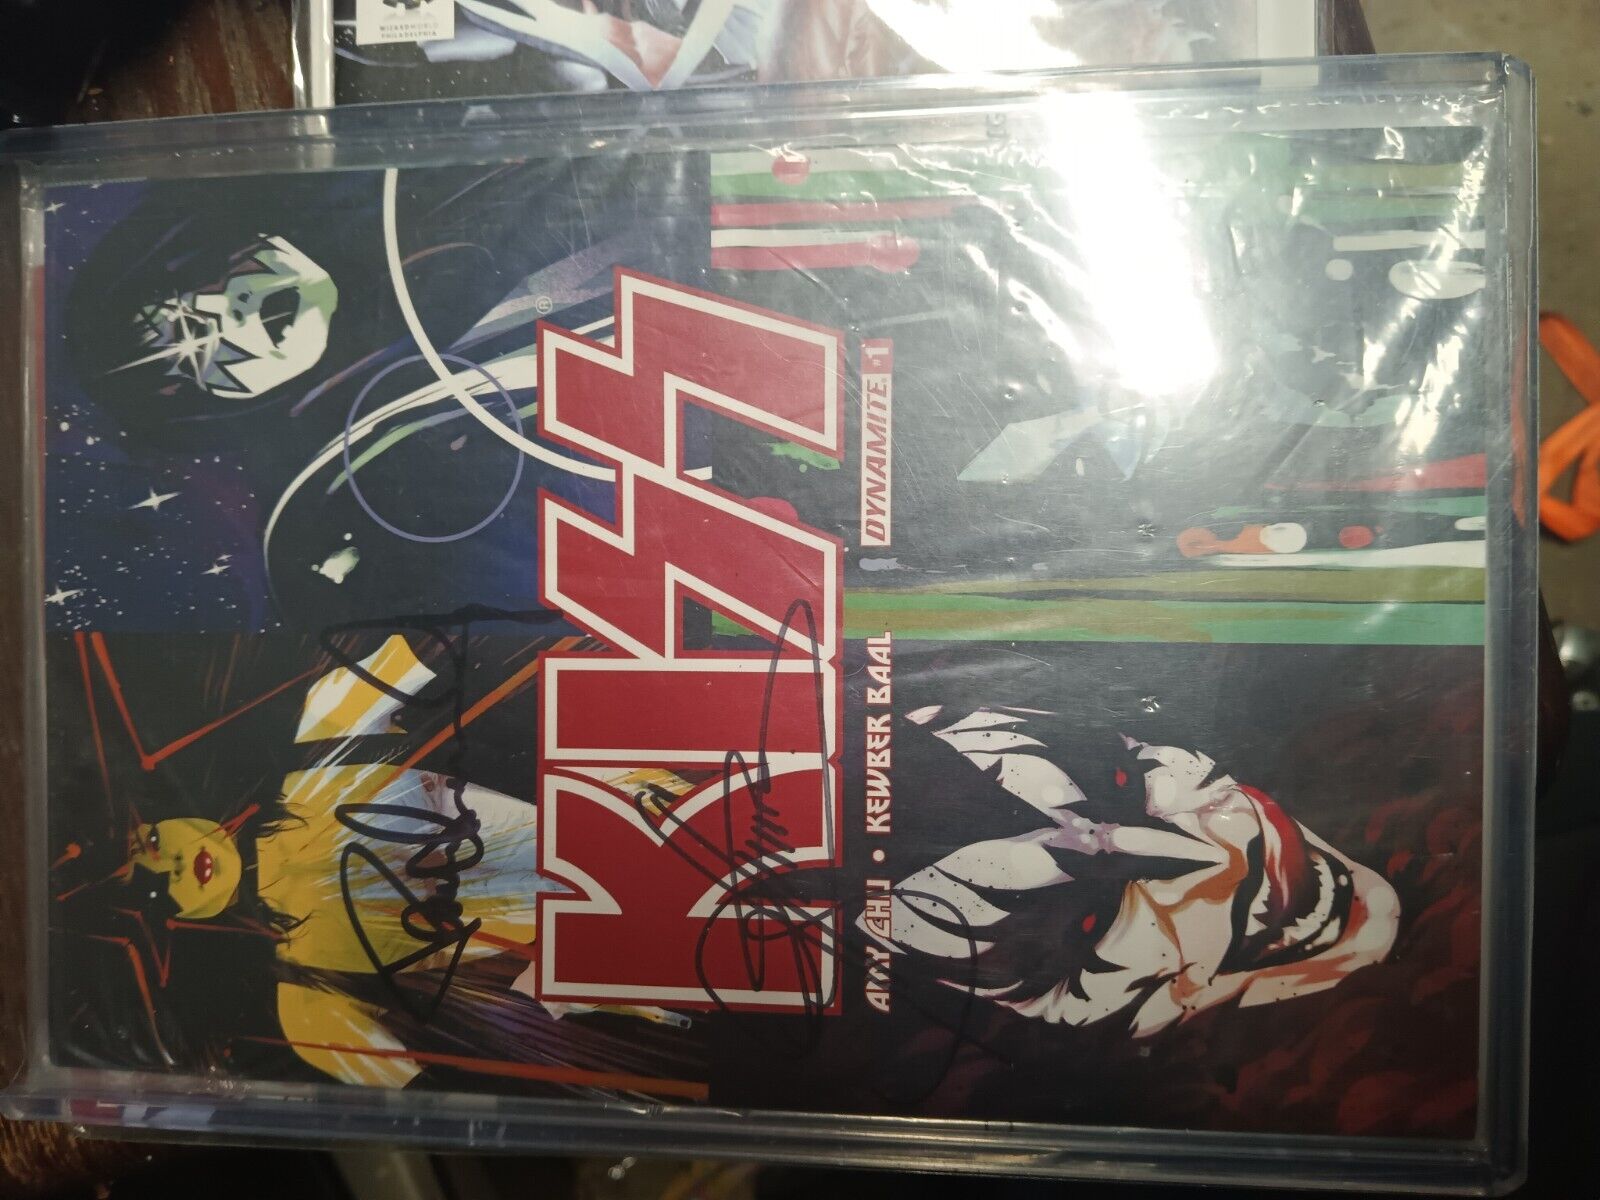 Dynamite Comics #1 KISS AUTOGRAPHED / SIGNED by Gene Simmons & Paul Stanley